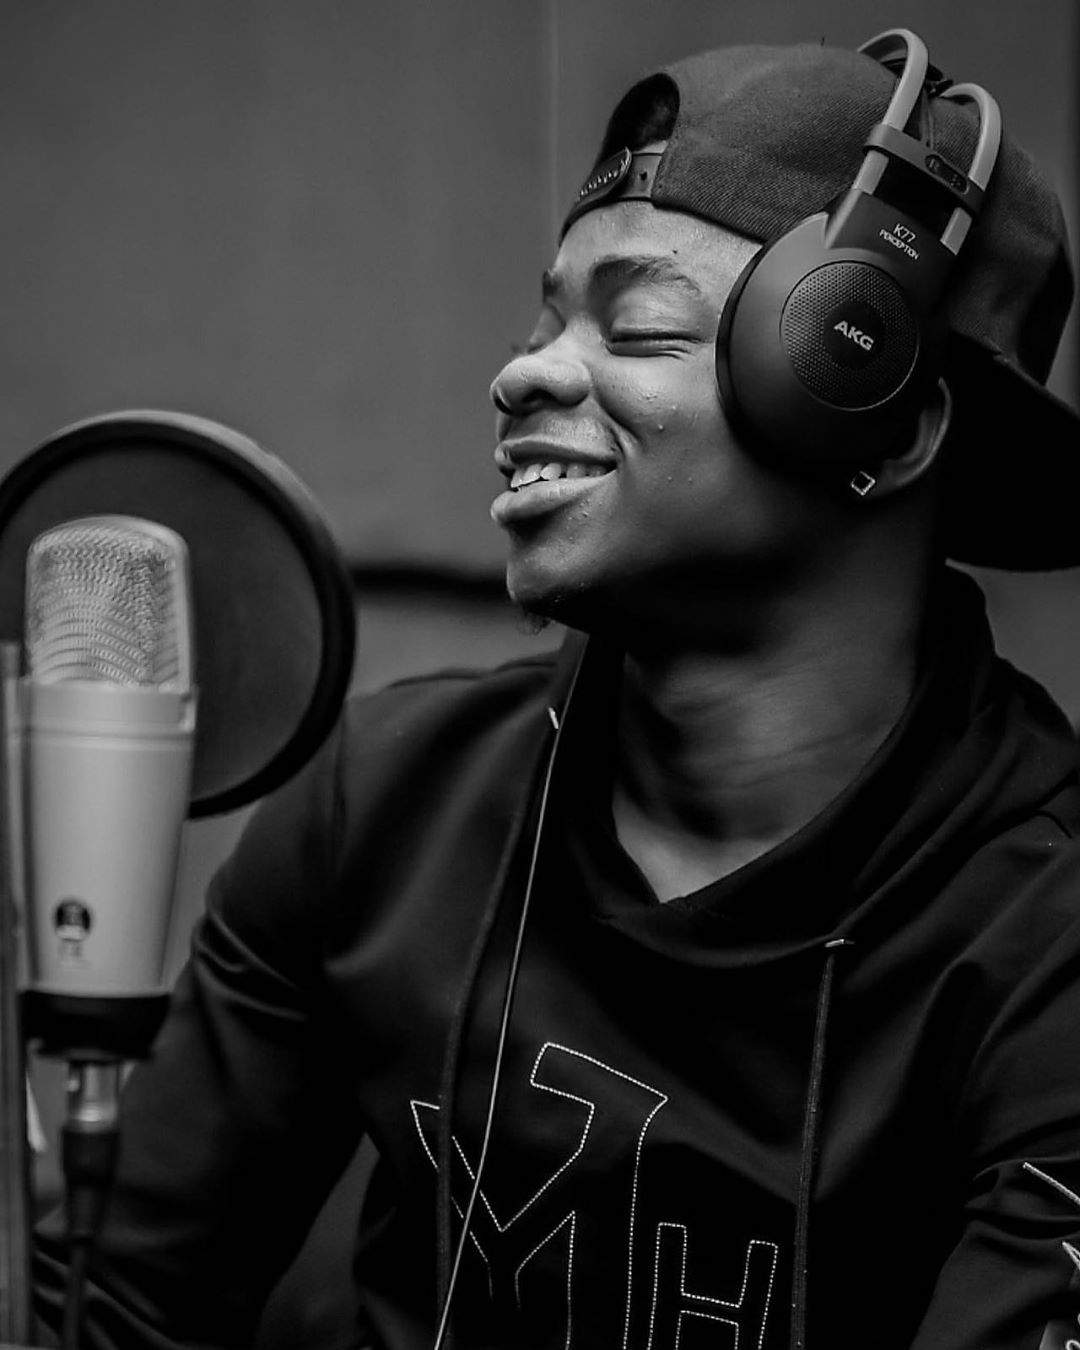 Trod, Dagrin's brother begs Olamide to pick his call